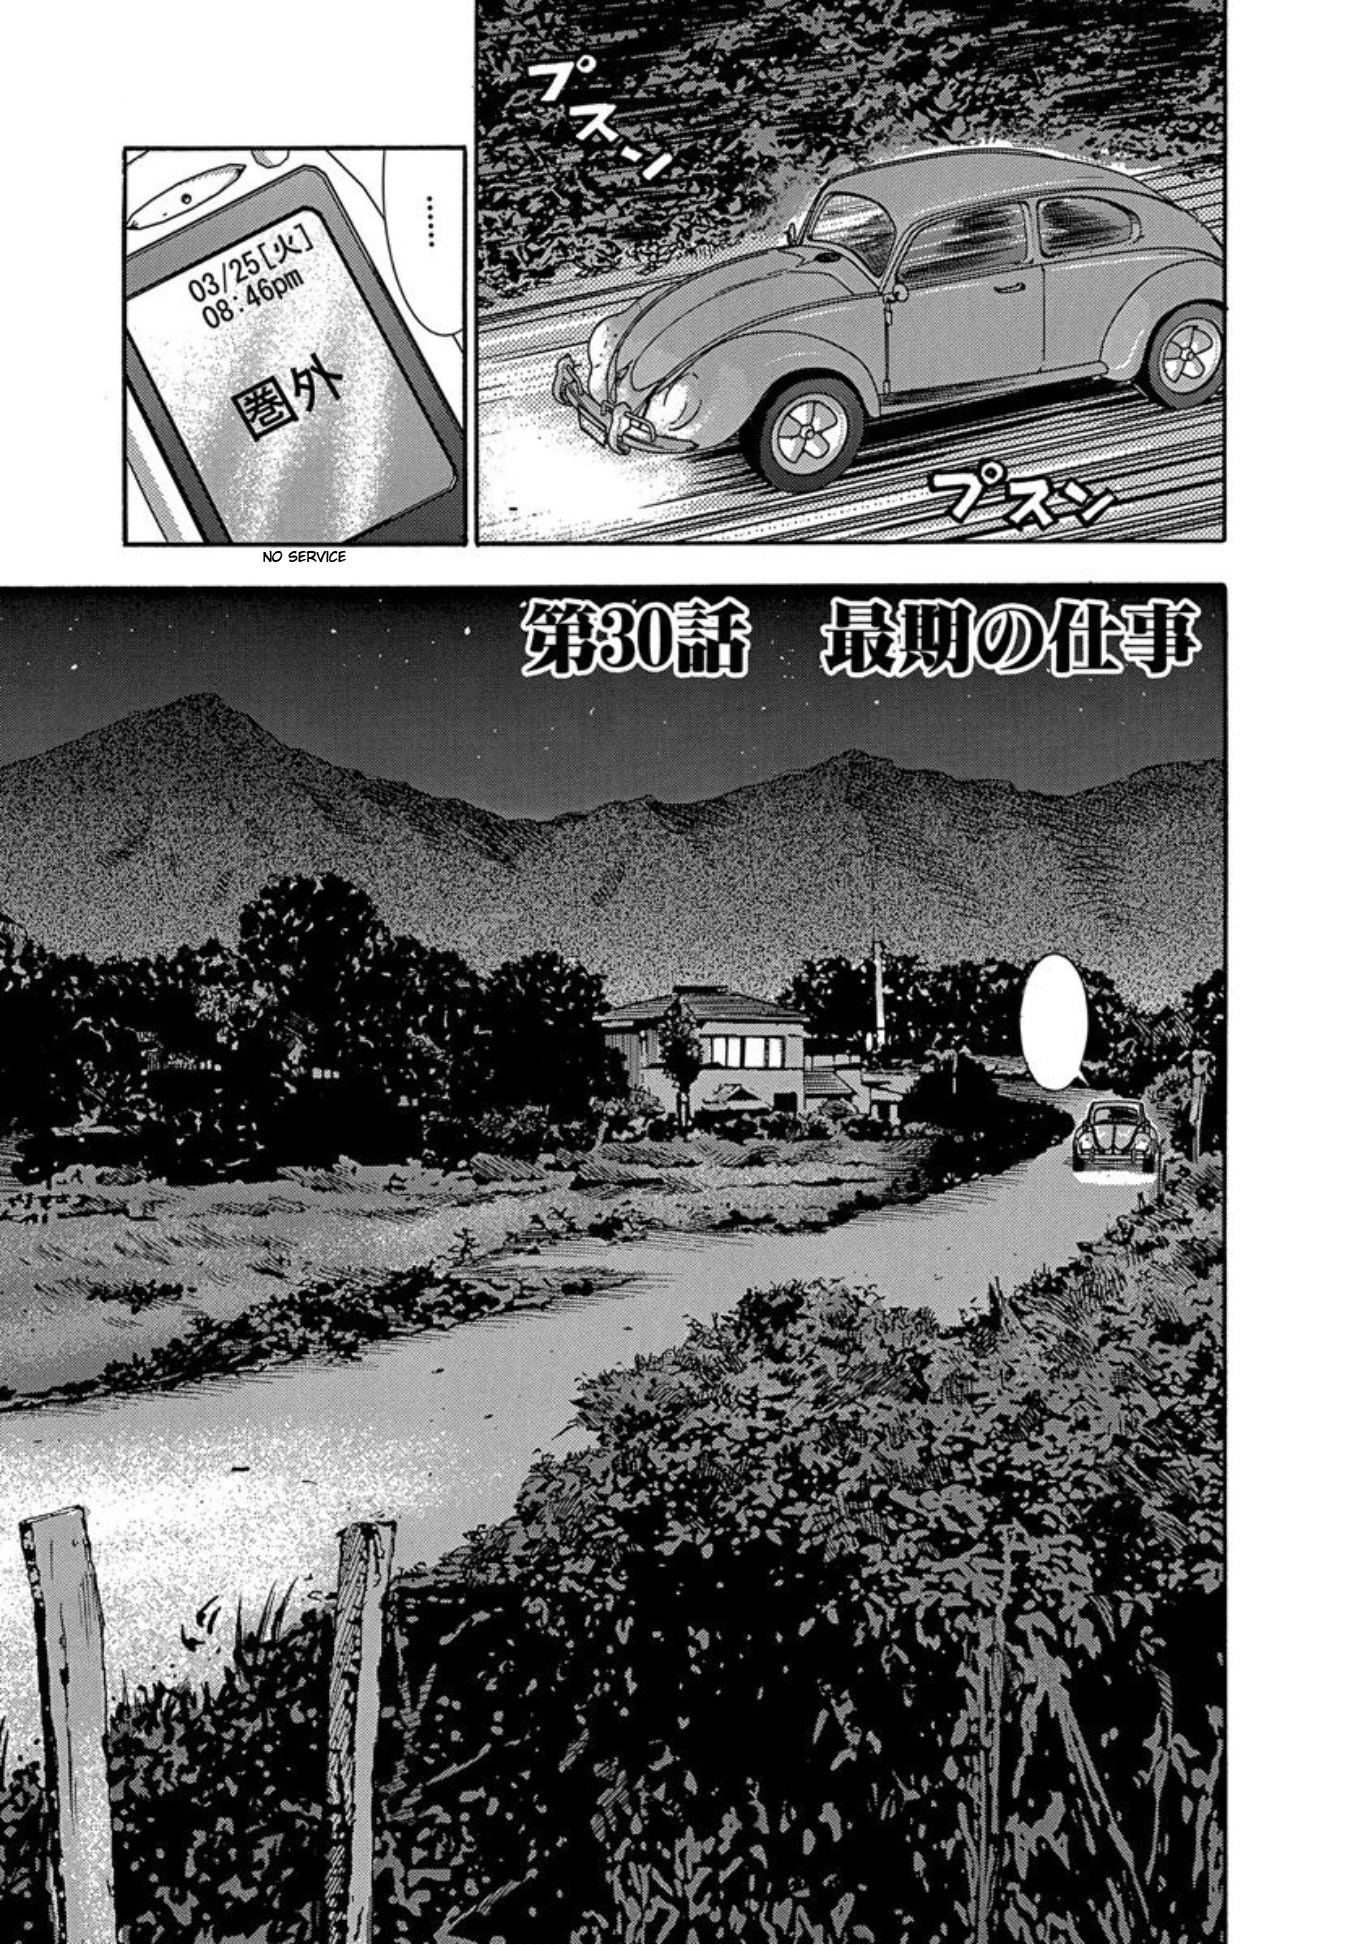 Uramiya Honpo Vol.5 Chapter 30: Final Mission - Picture 1